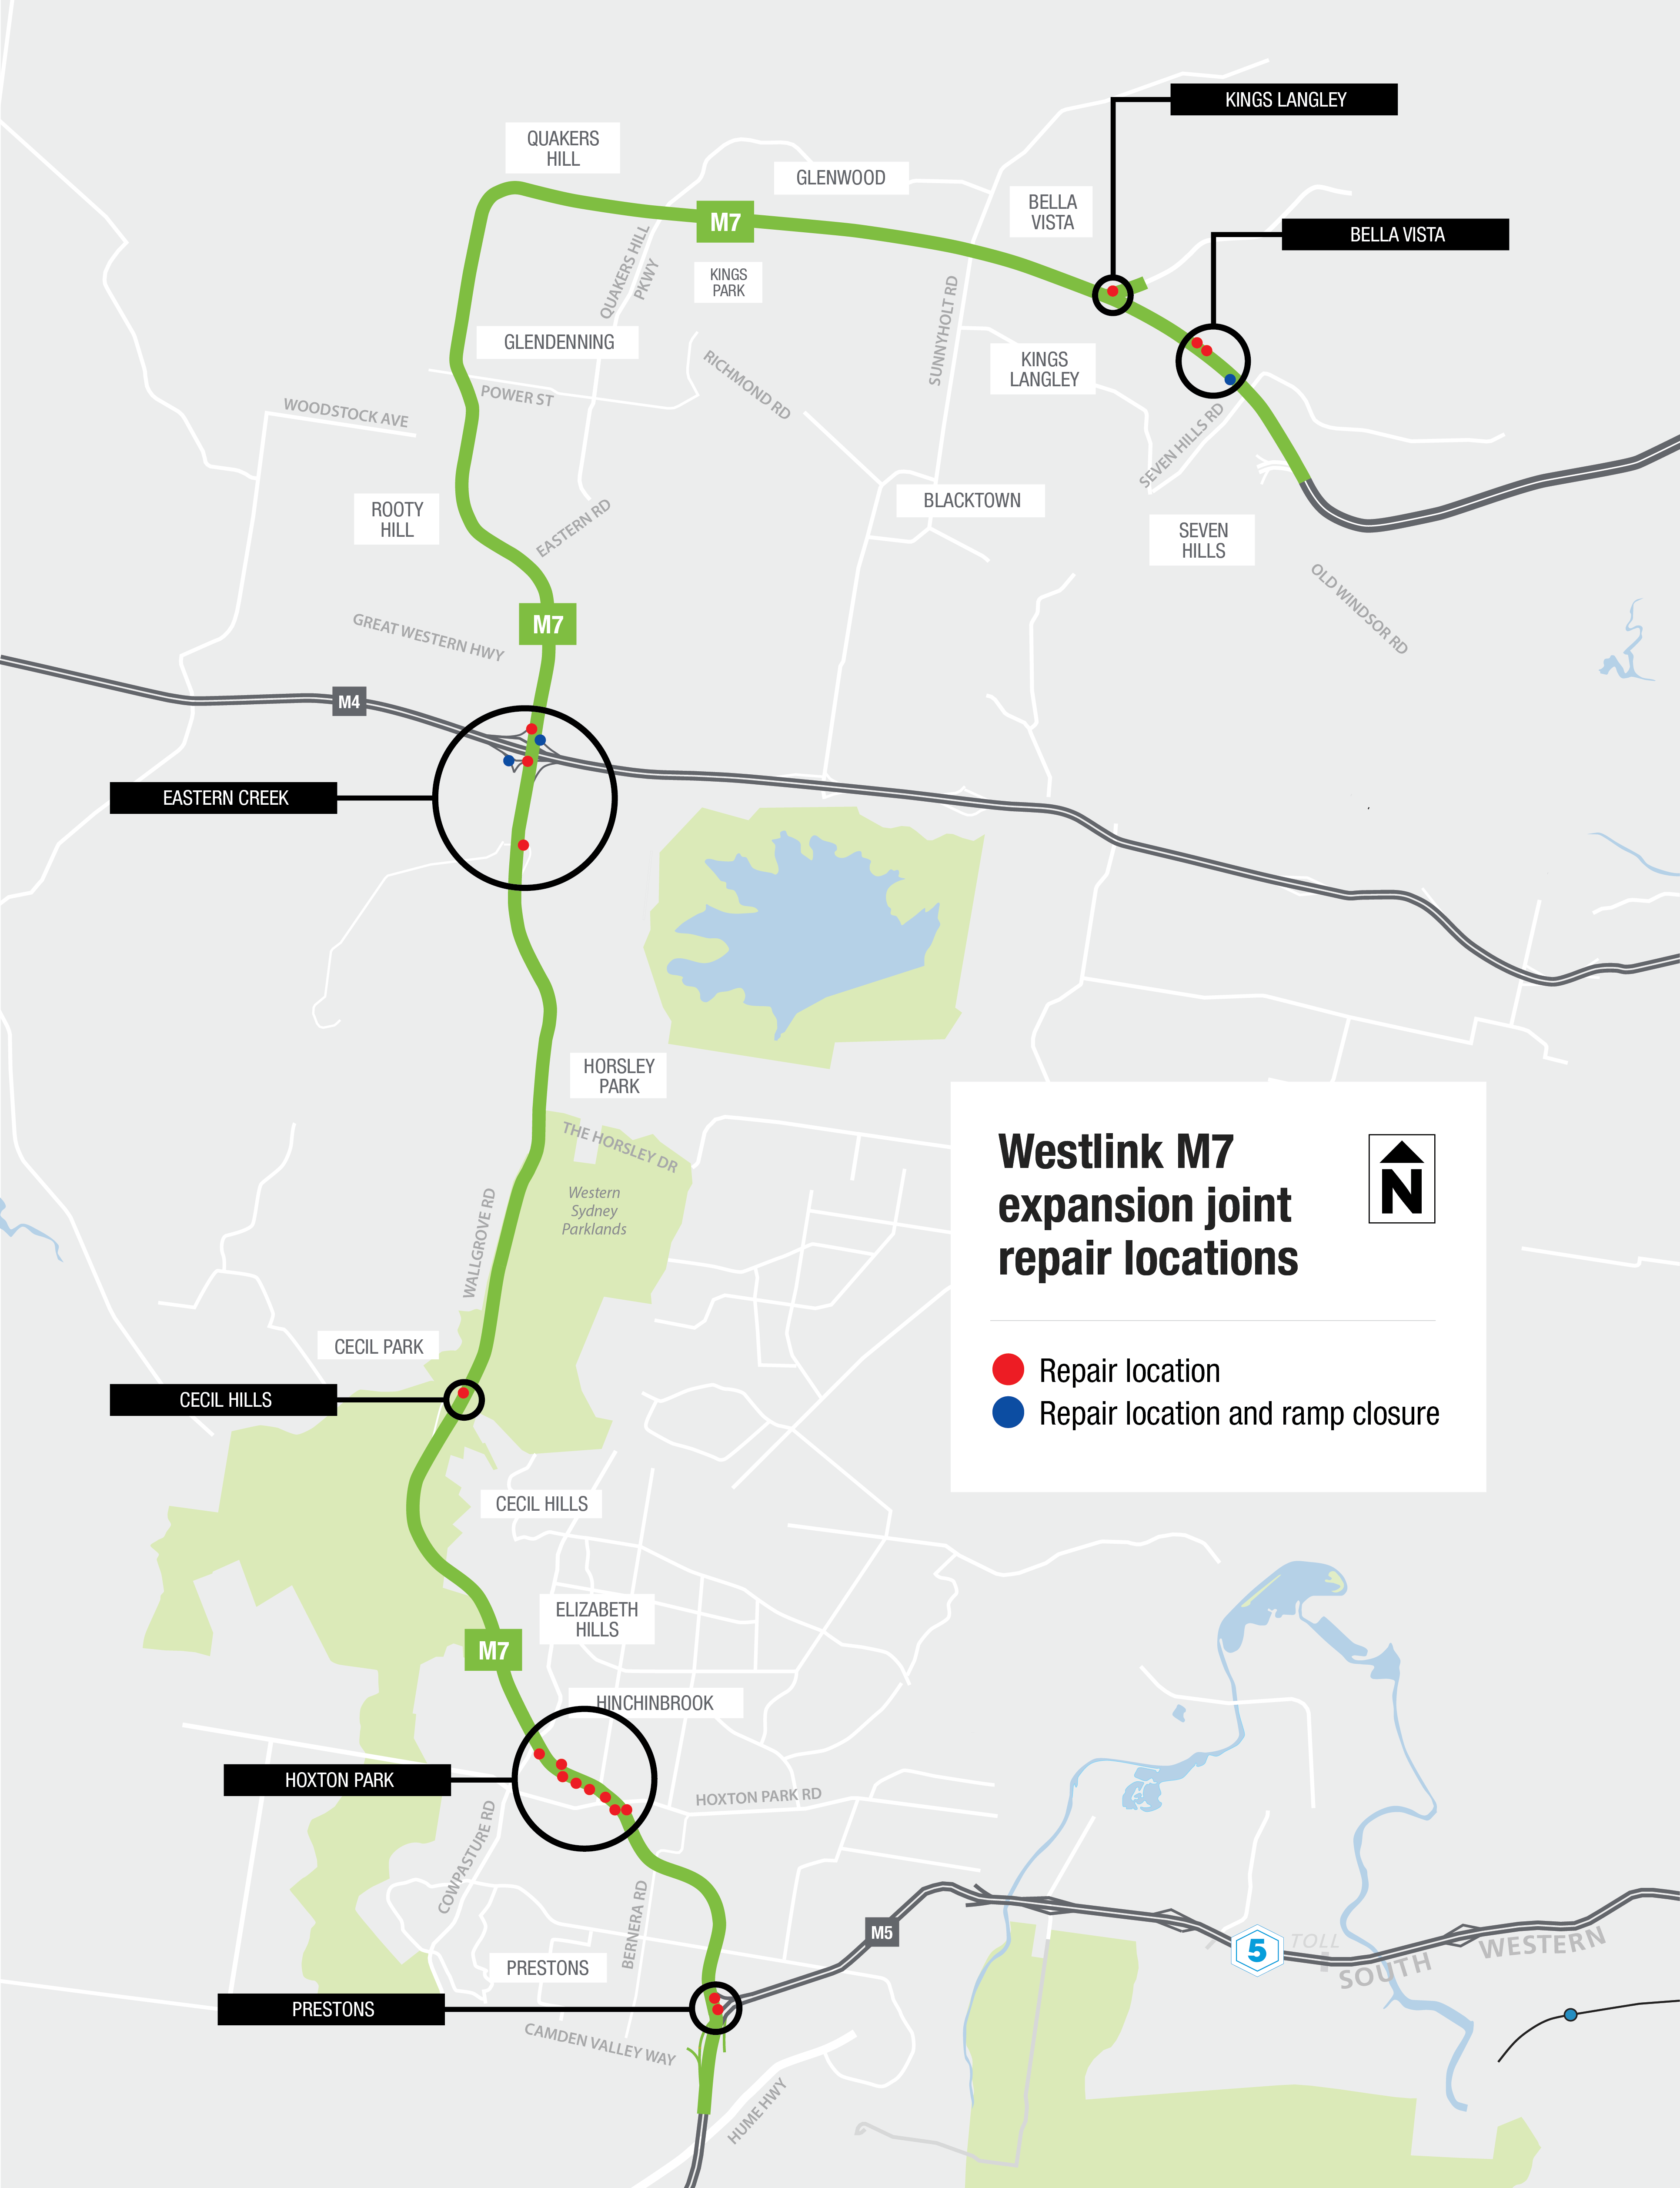 map showing Westlink M7 expansion joint repair locations and ramp closures.